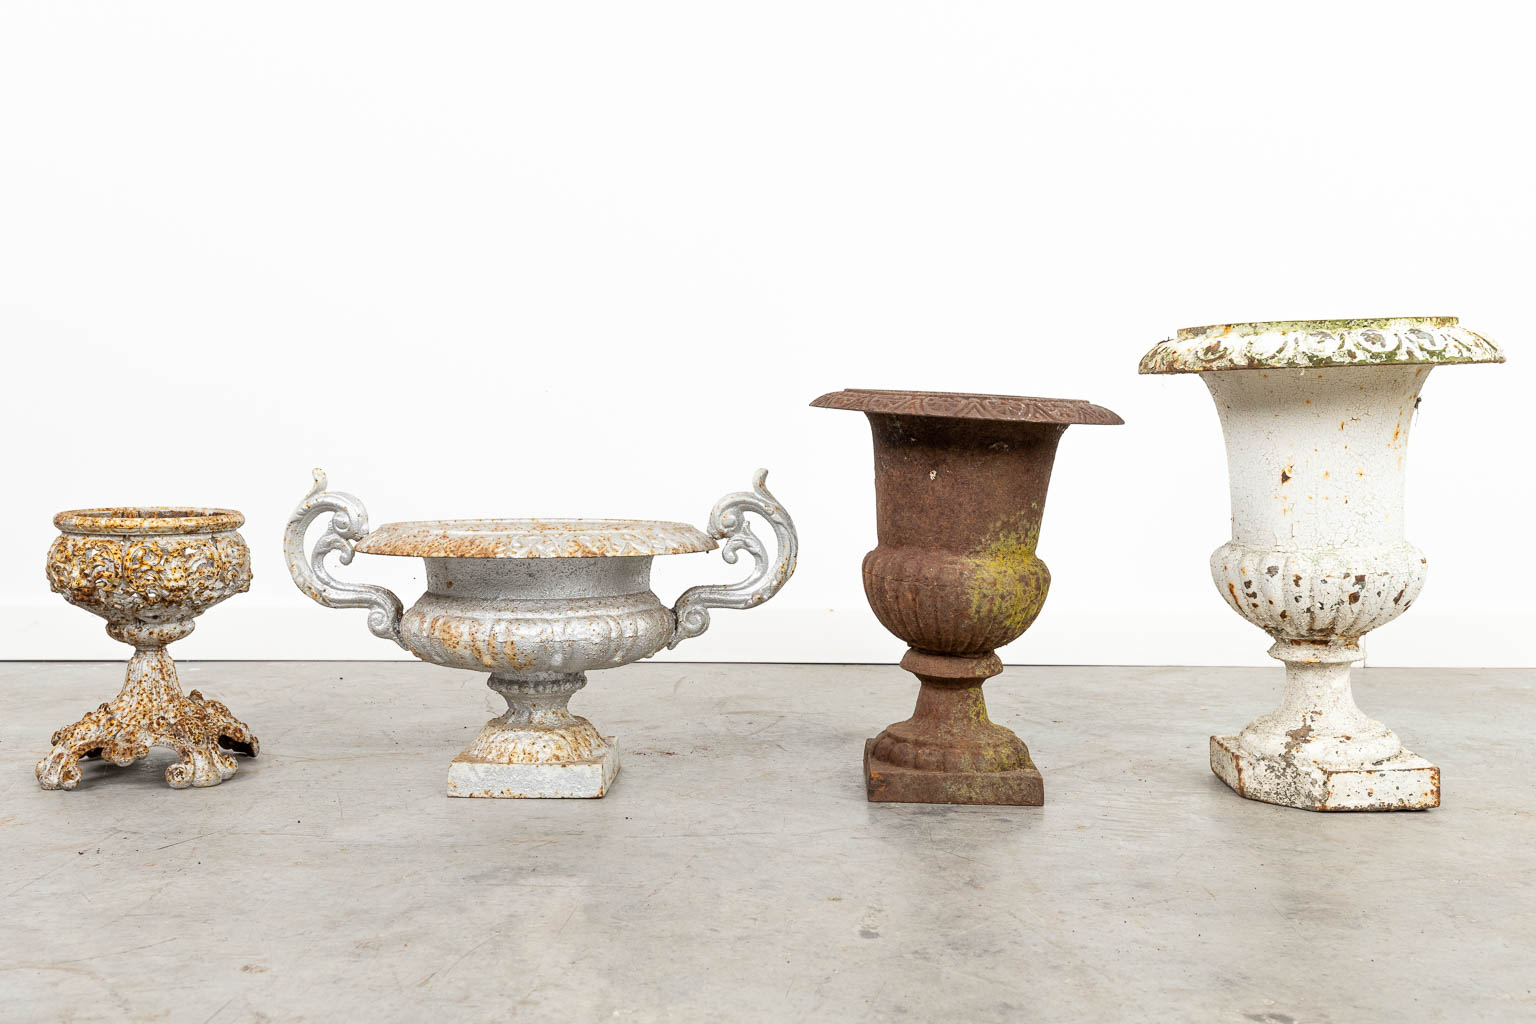 A collection of 7 different garden vases made of cast iron. 